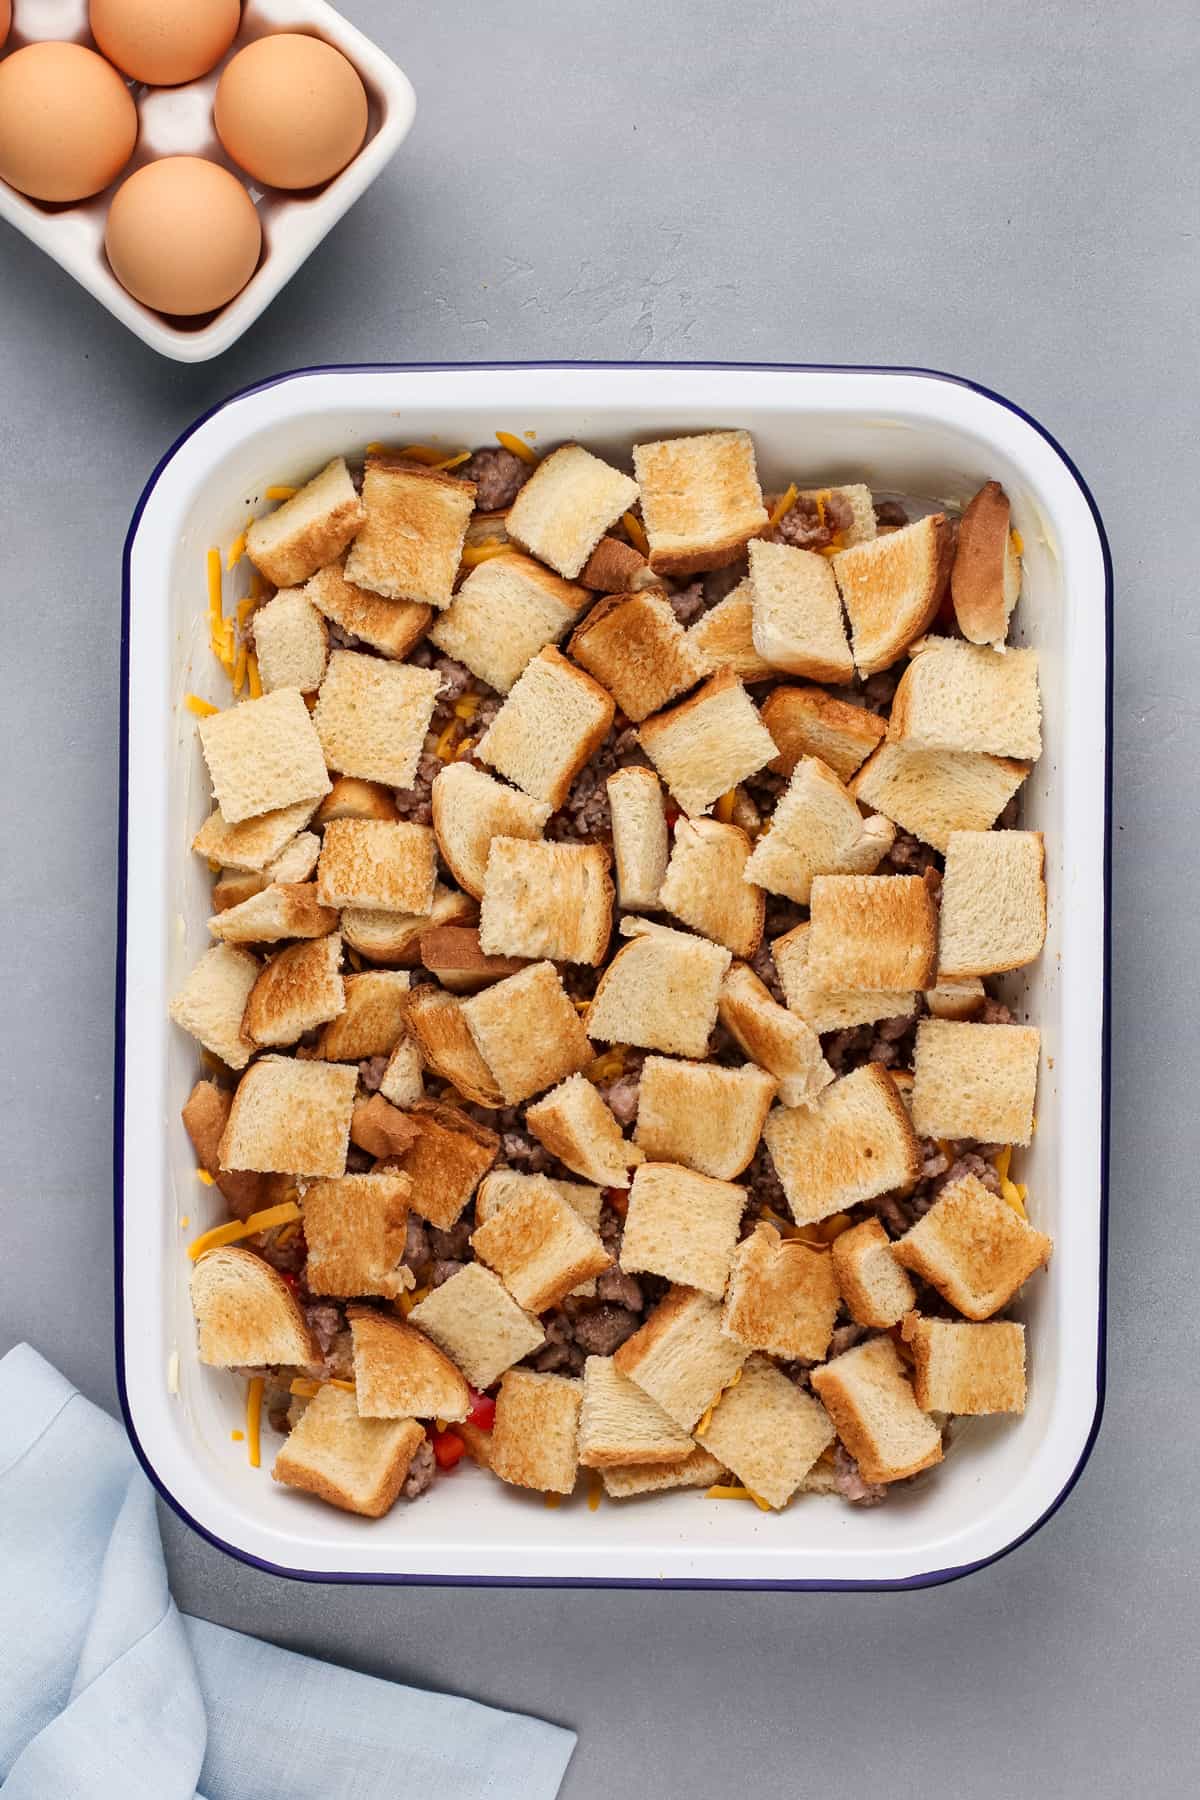 Toasted cubed bread layered in a baking dish.